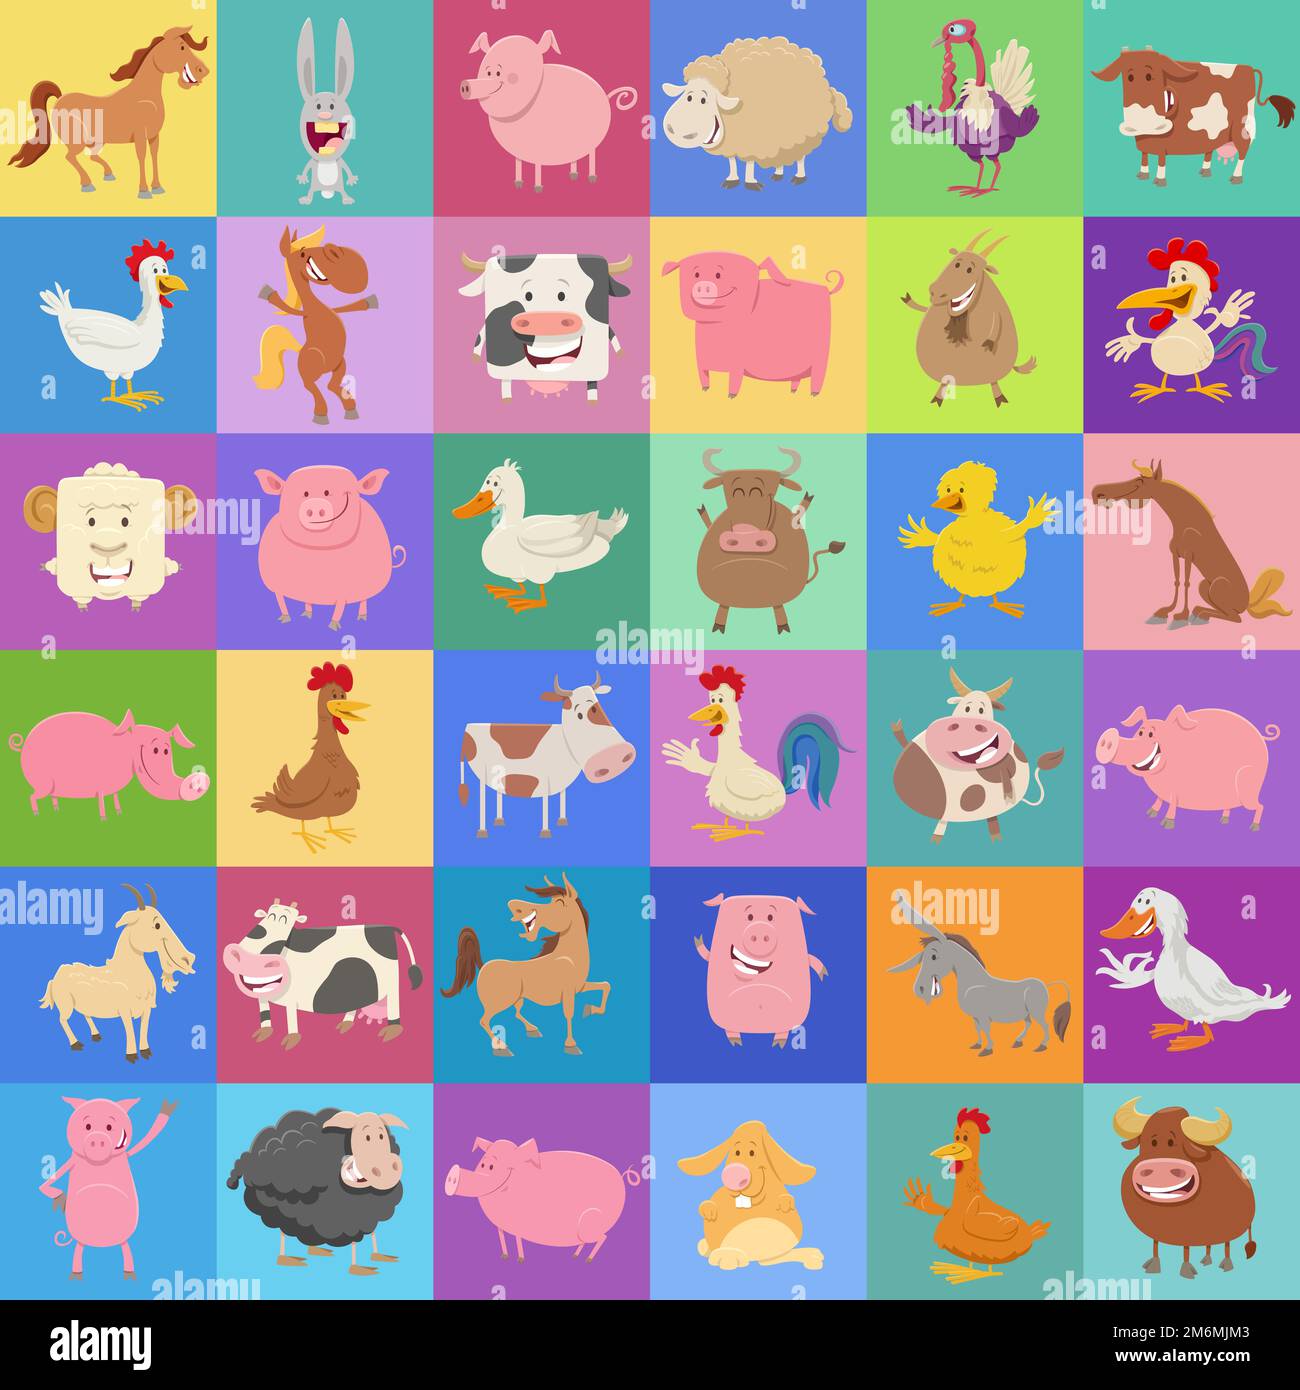 Background design with cartoon farm animal characters Stock Photo